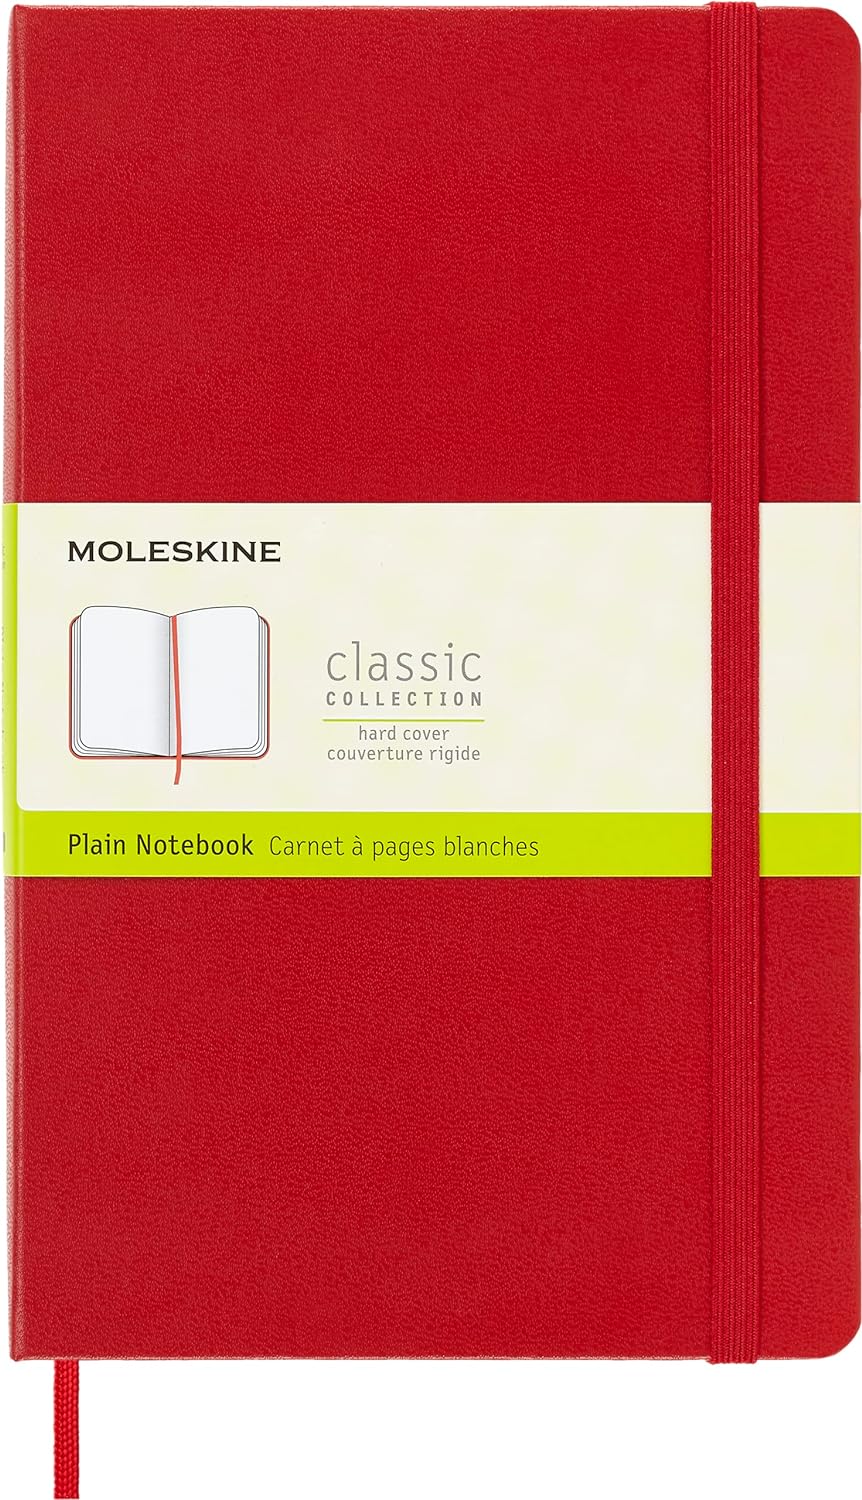 plain-blank-classic-notebook-soft-cover-large-red